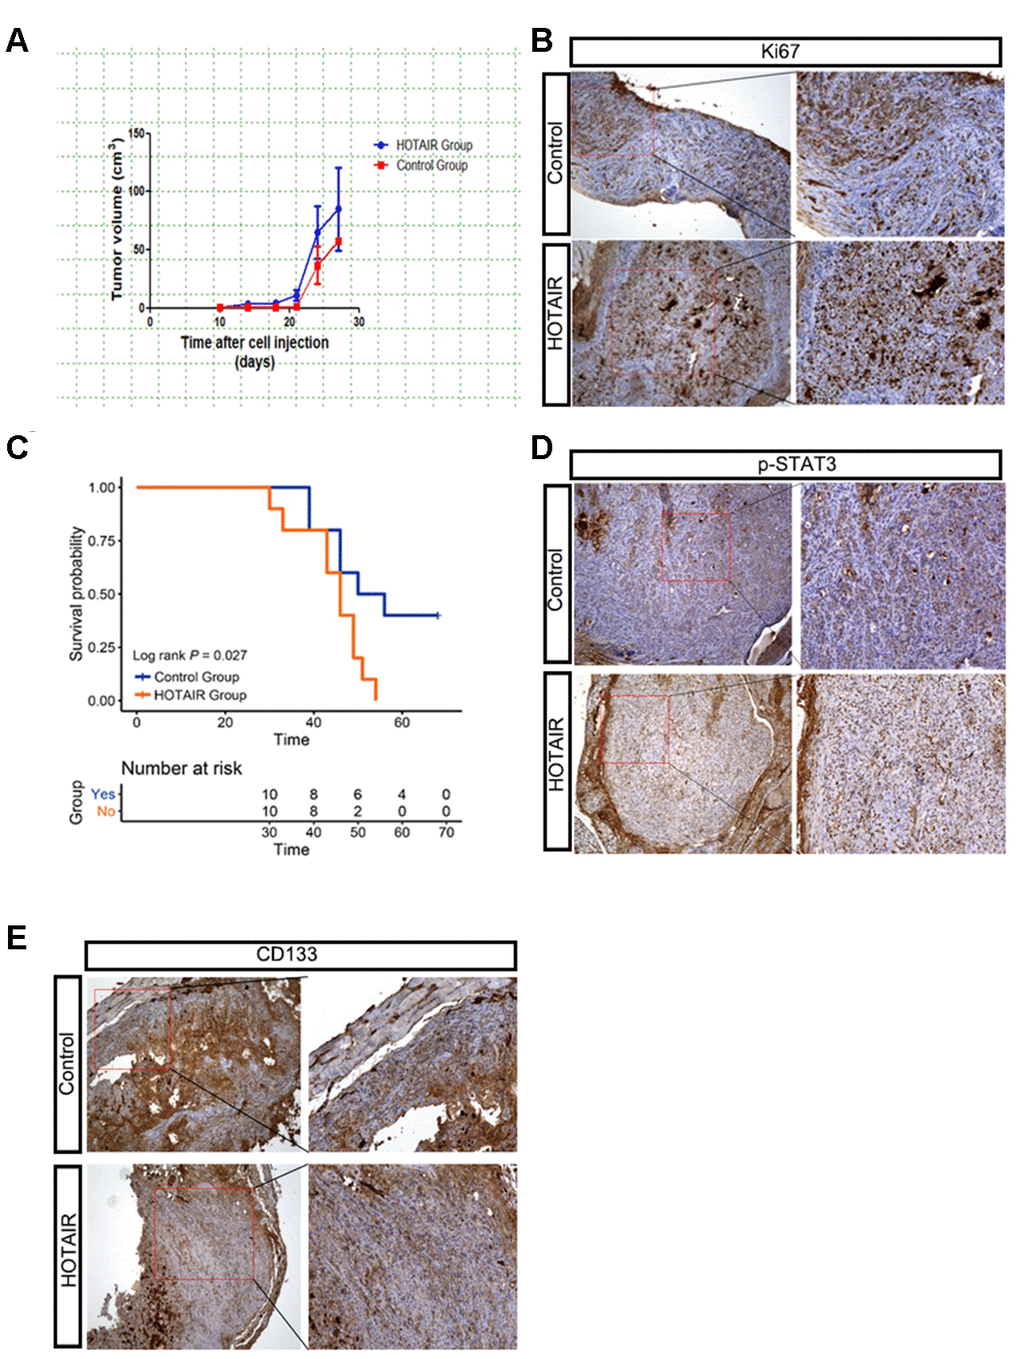 HOTAIR promotes tumor growth of xenografted PCa mouse model. (A) HOTAIR Du145 tumors grew faster than control ones. Tumor volume=1/2*short axis2*long axis. (B) IHC staining of Ki67 indicated that HOTAIR Du145 tumors had higher proliferating rate. (C) HOTAIR Du145 mice had poor survival rate compared to control cohorts. (D) IHC staining of p-STAT3. (E) IHC staining of CD133.